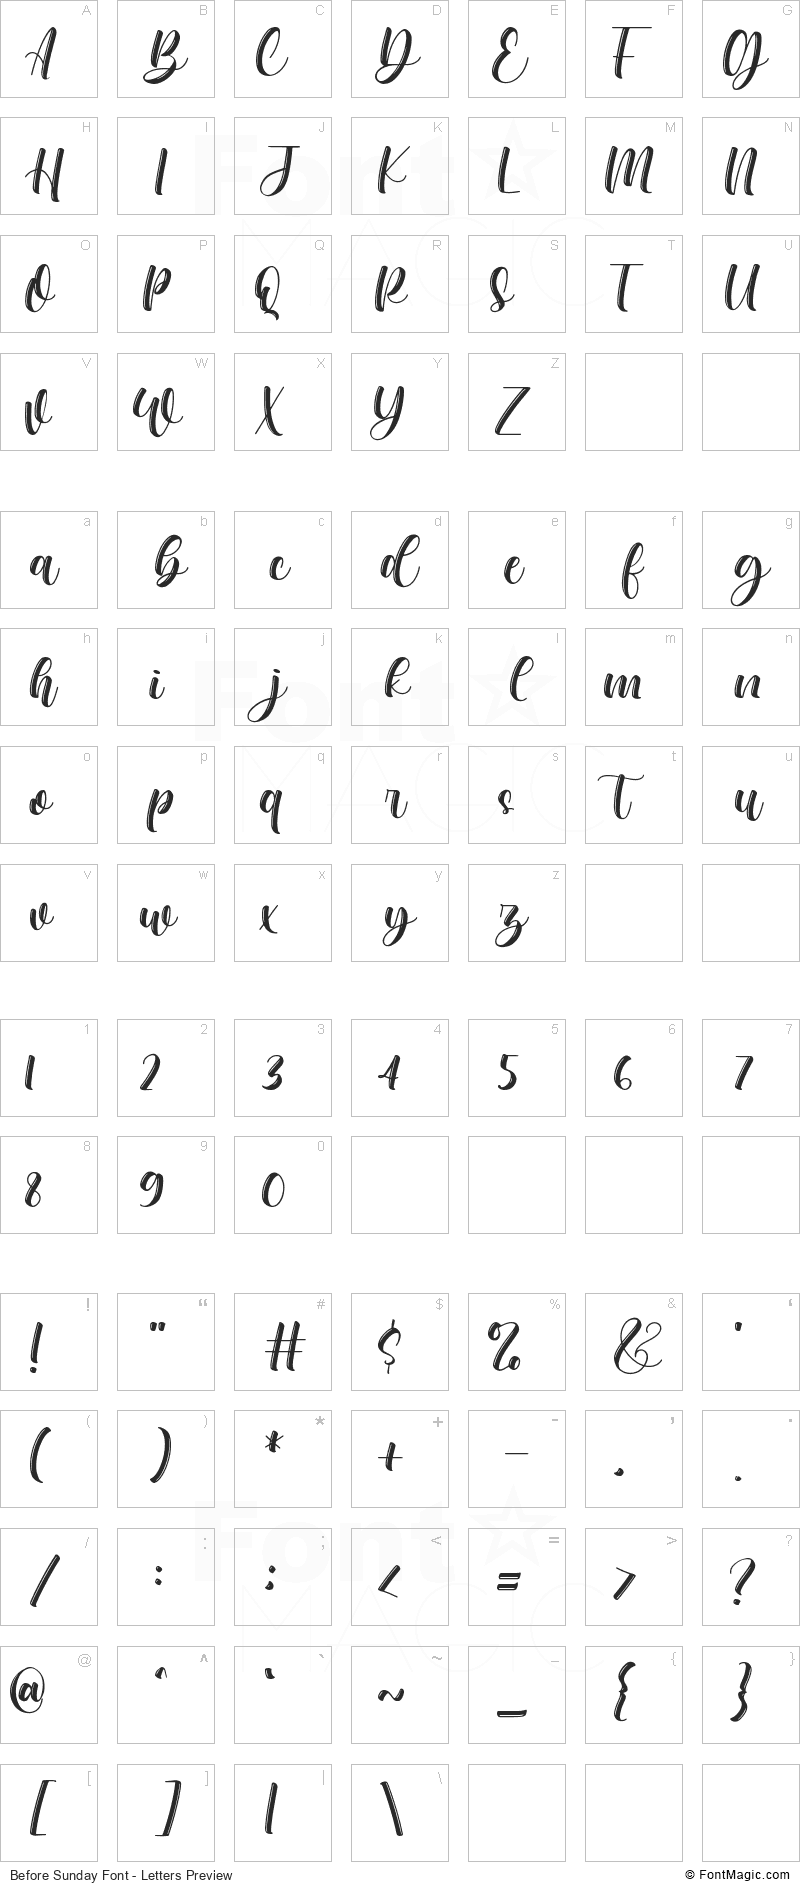 Before Sunday Font - All Latters Preview Chart